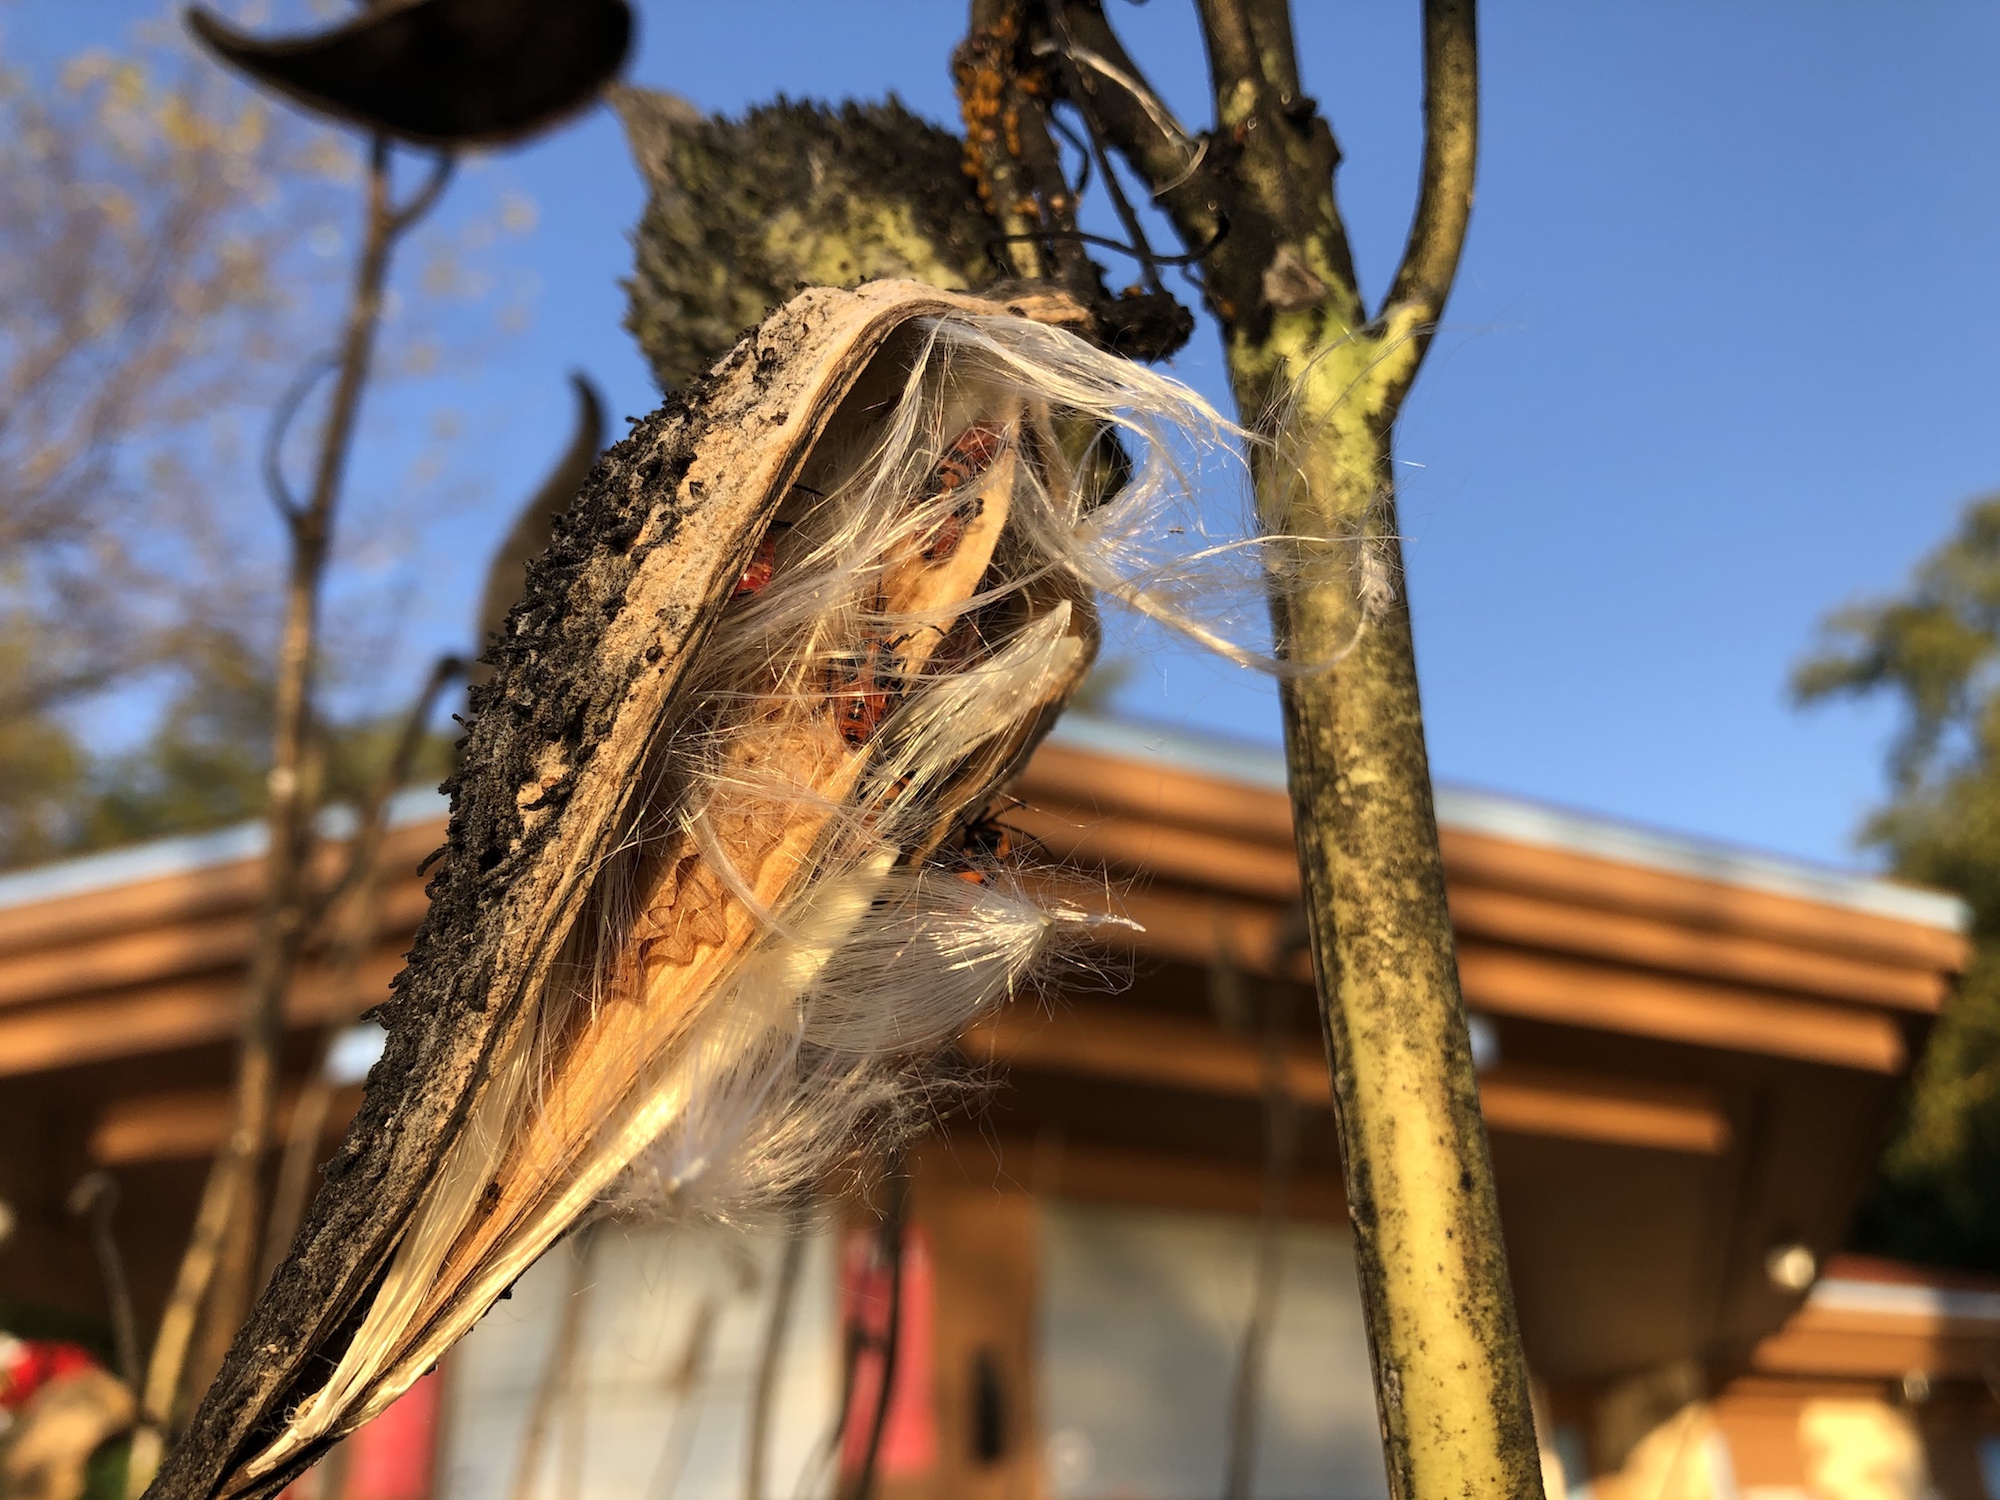 Common Milkweed by Wingra Boats on October 12, 2019.